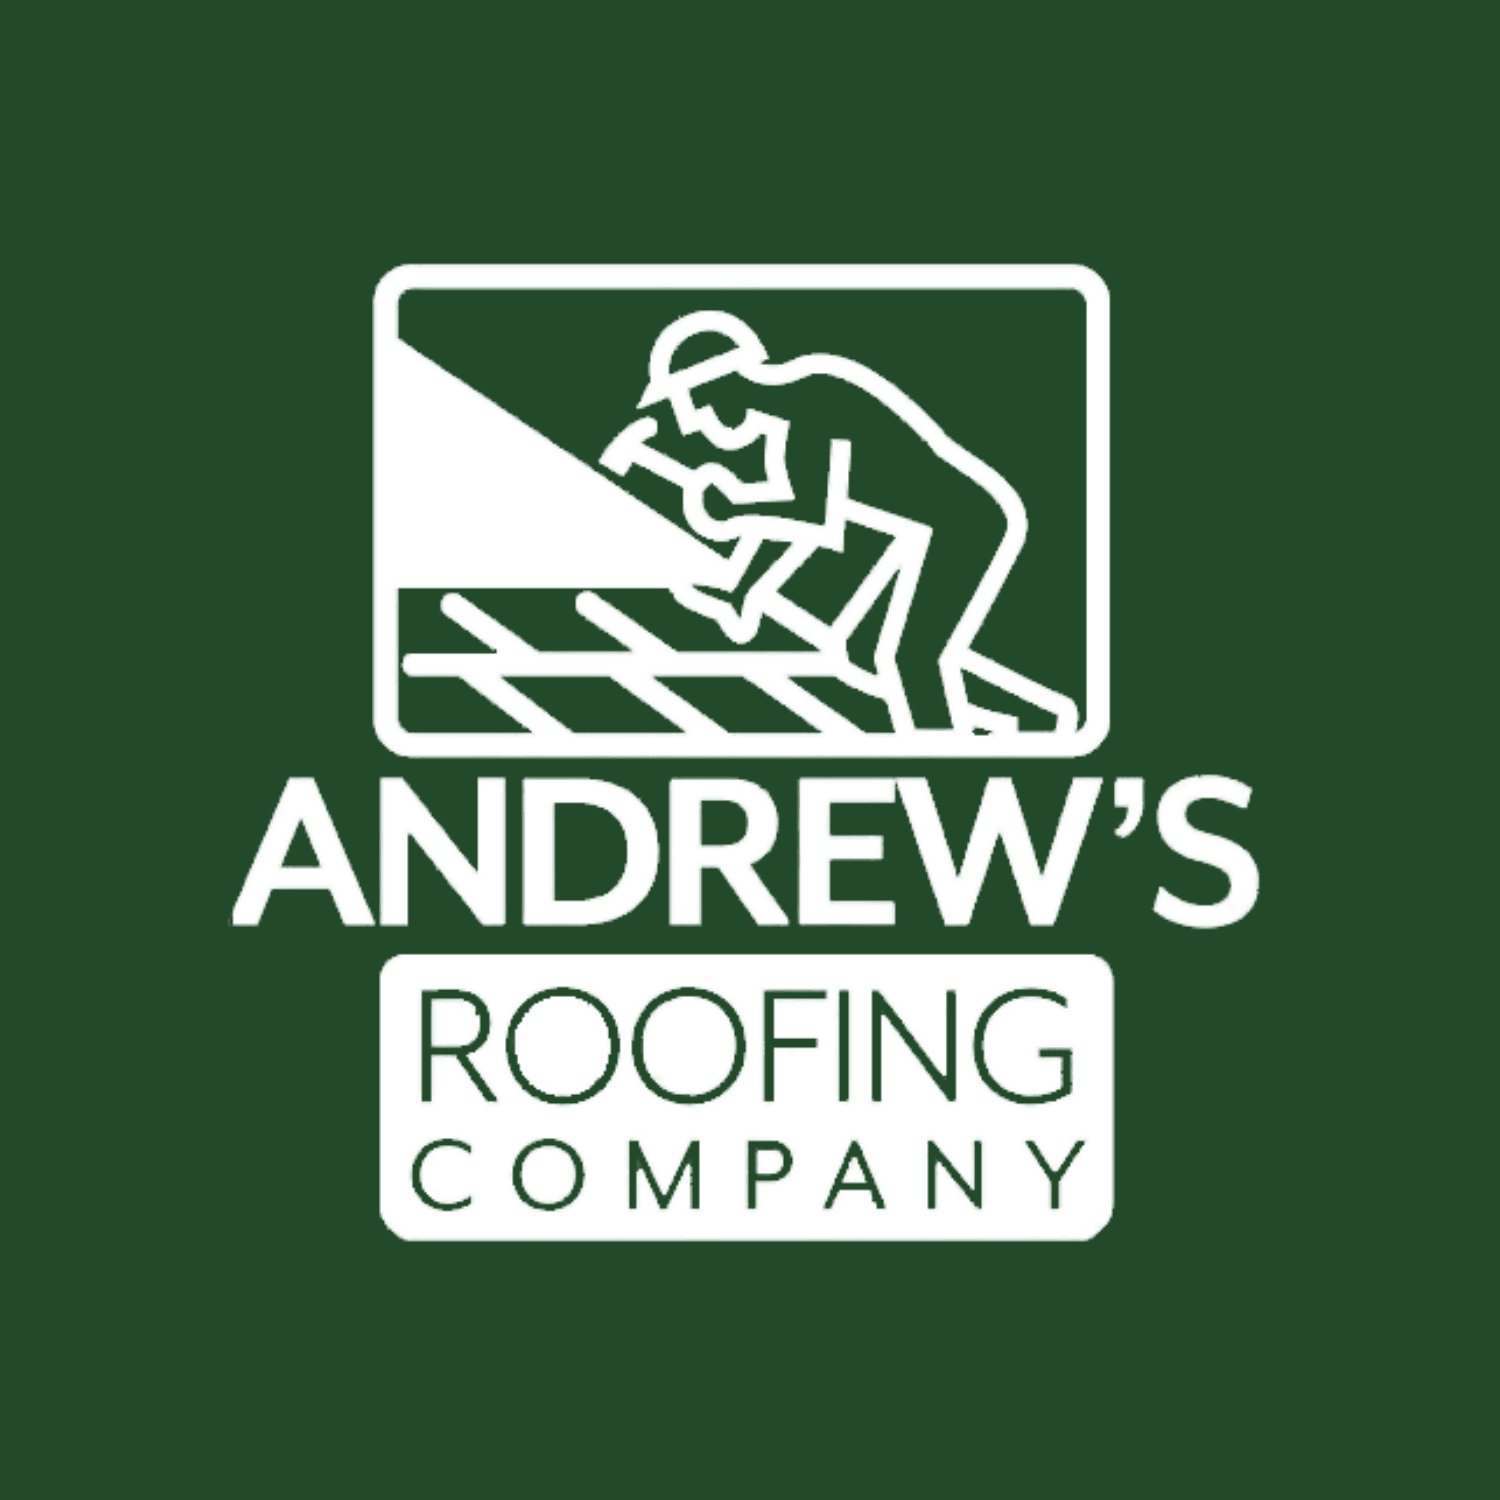 Andrews Roofing Company